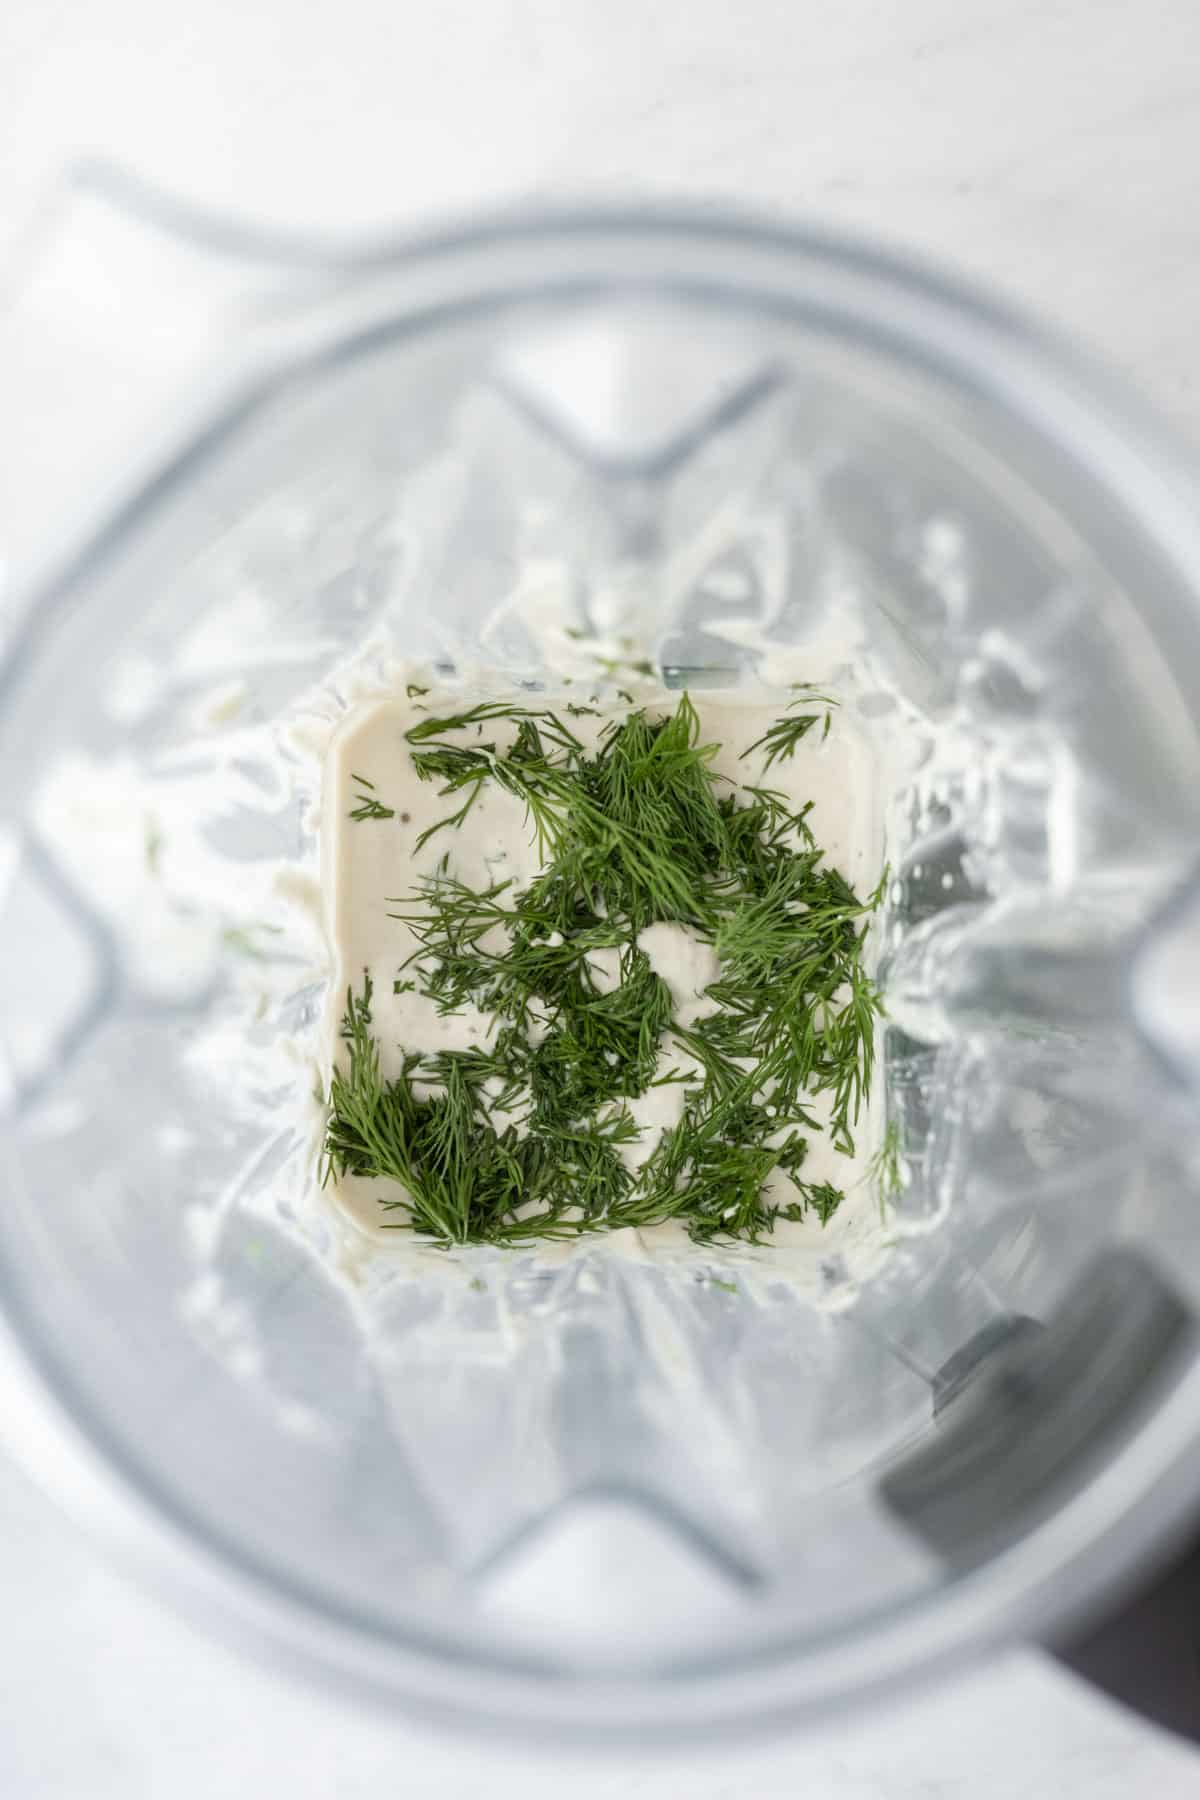 Looking inside a blender with fresh dill added to the dressing.